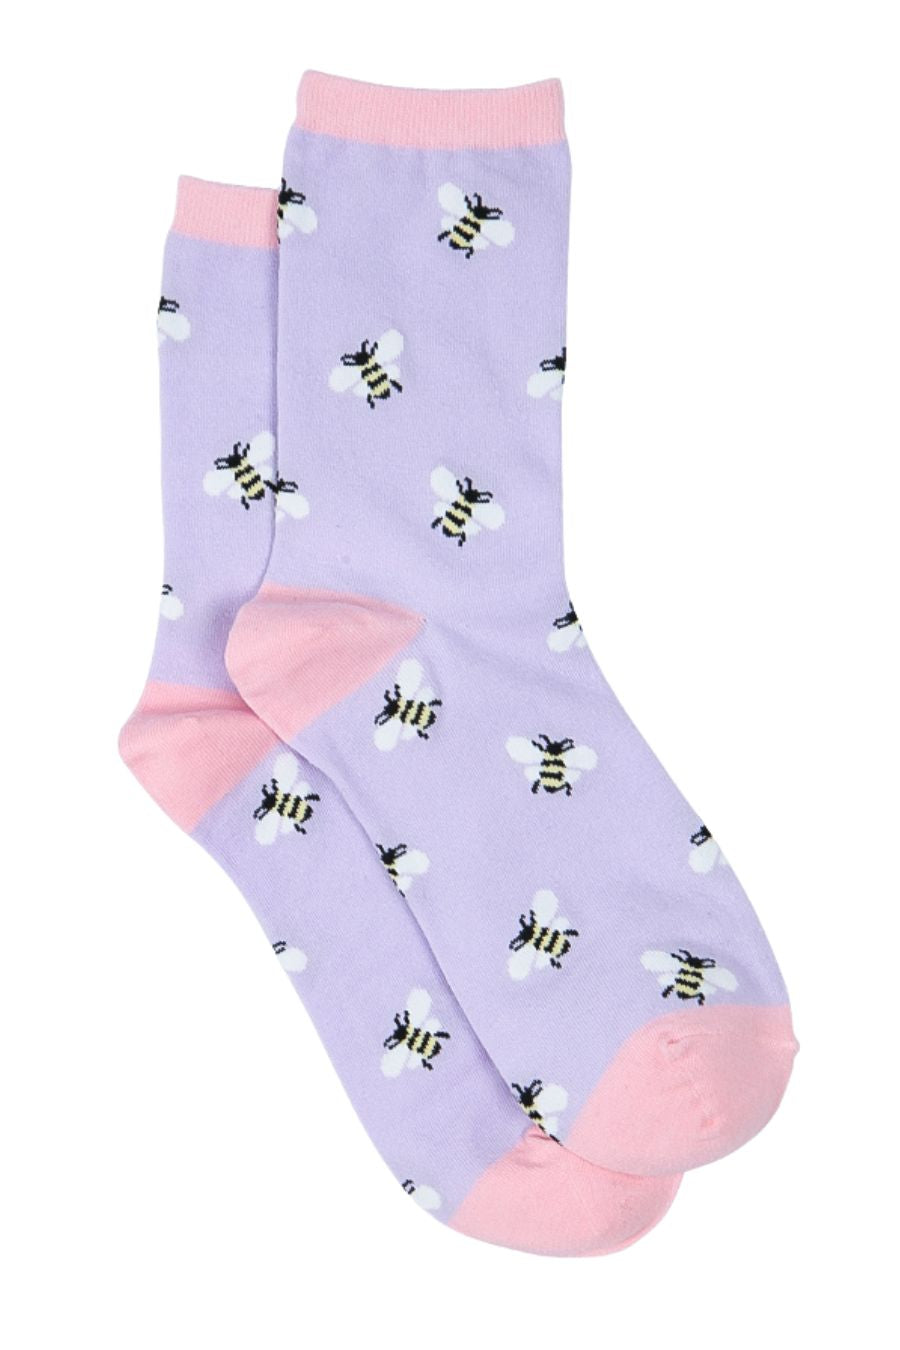 lilac ankle socks with an all over bee print, pink toe, heel and tirm